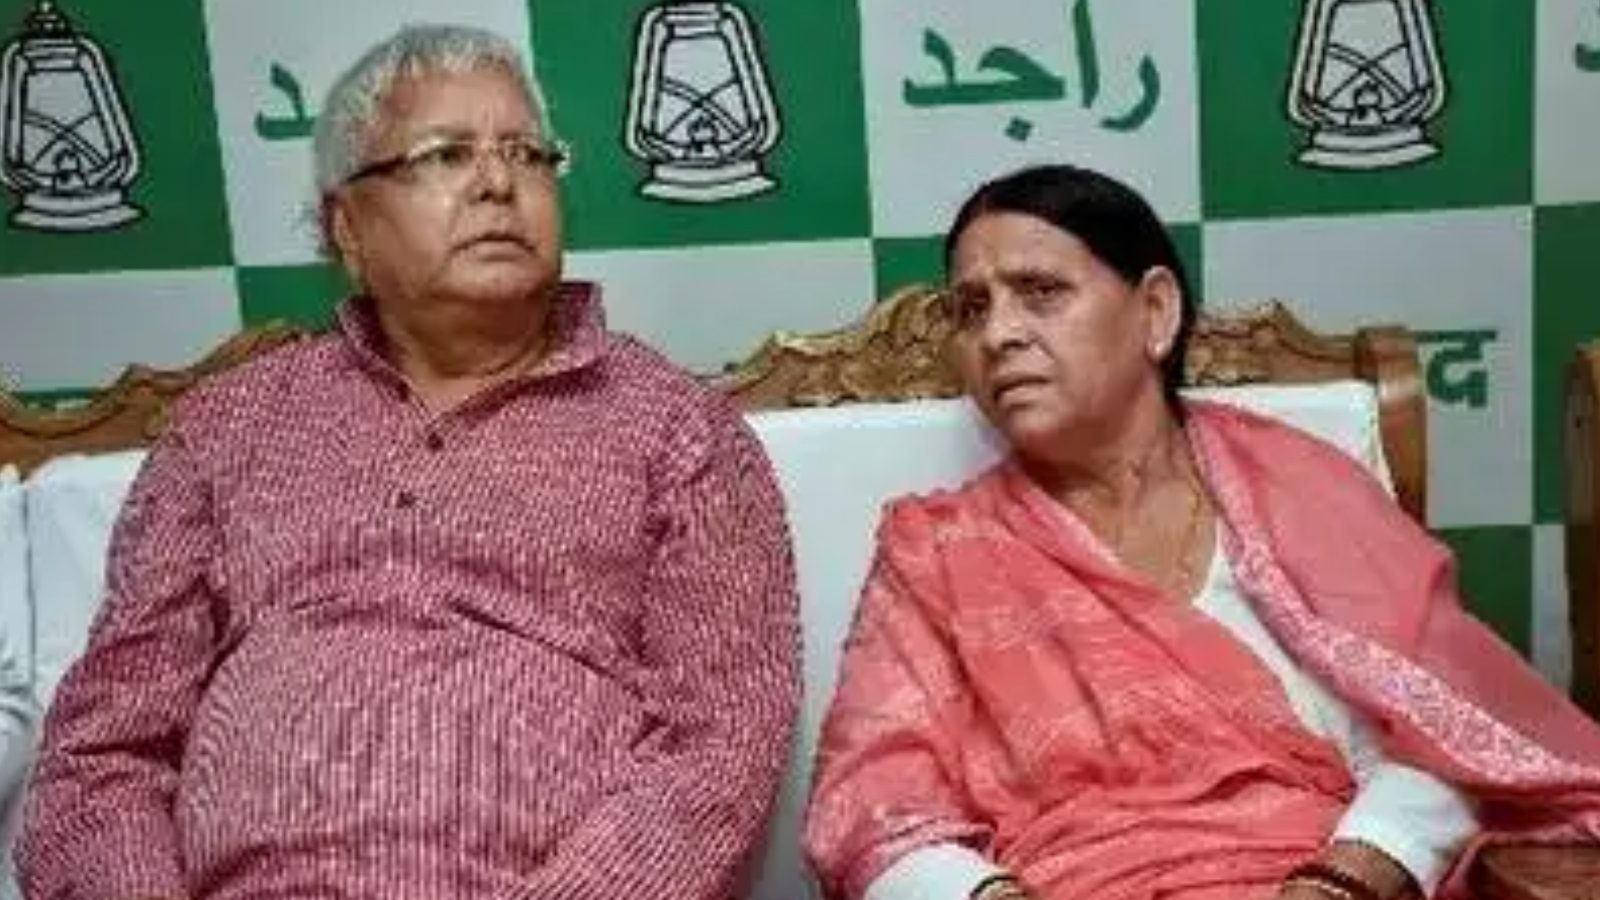 Probe Officials Visit Rabri Devi’s Residence in Land for Jobs Scam Case – NewsEverything Politics